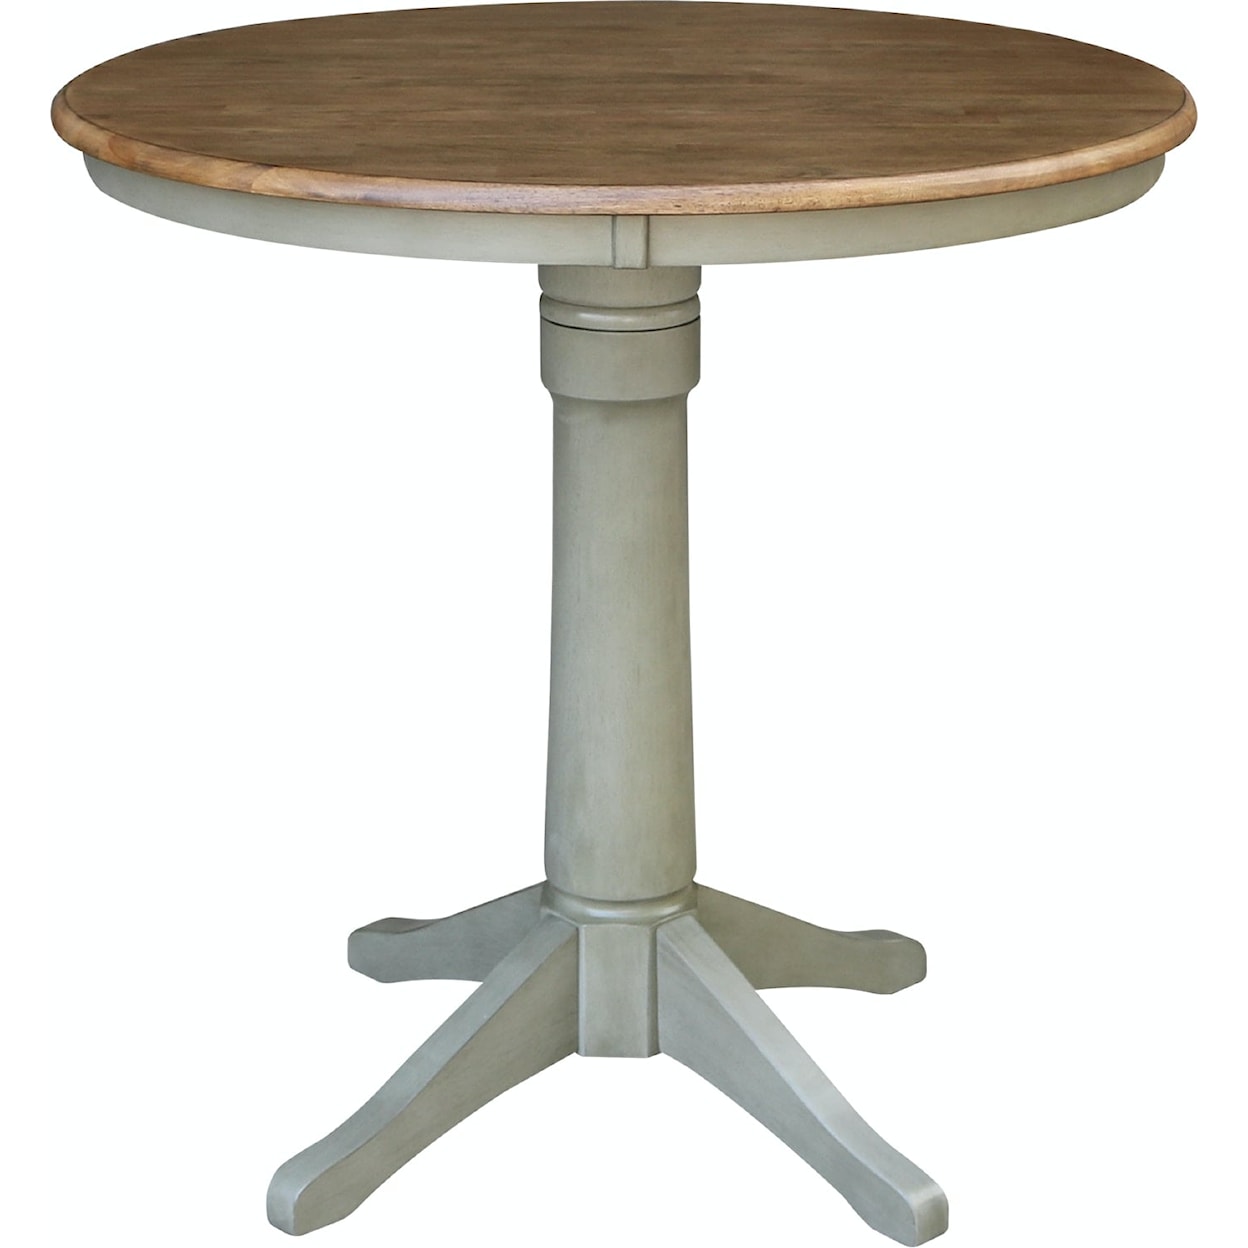 John Thomas Dining Essentials 36'' Pedestal Table in Hickory/Stone